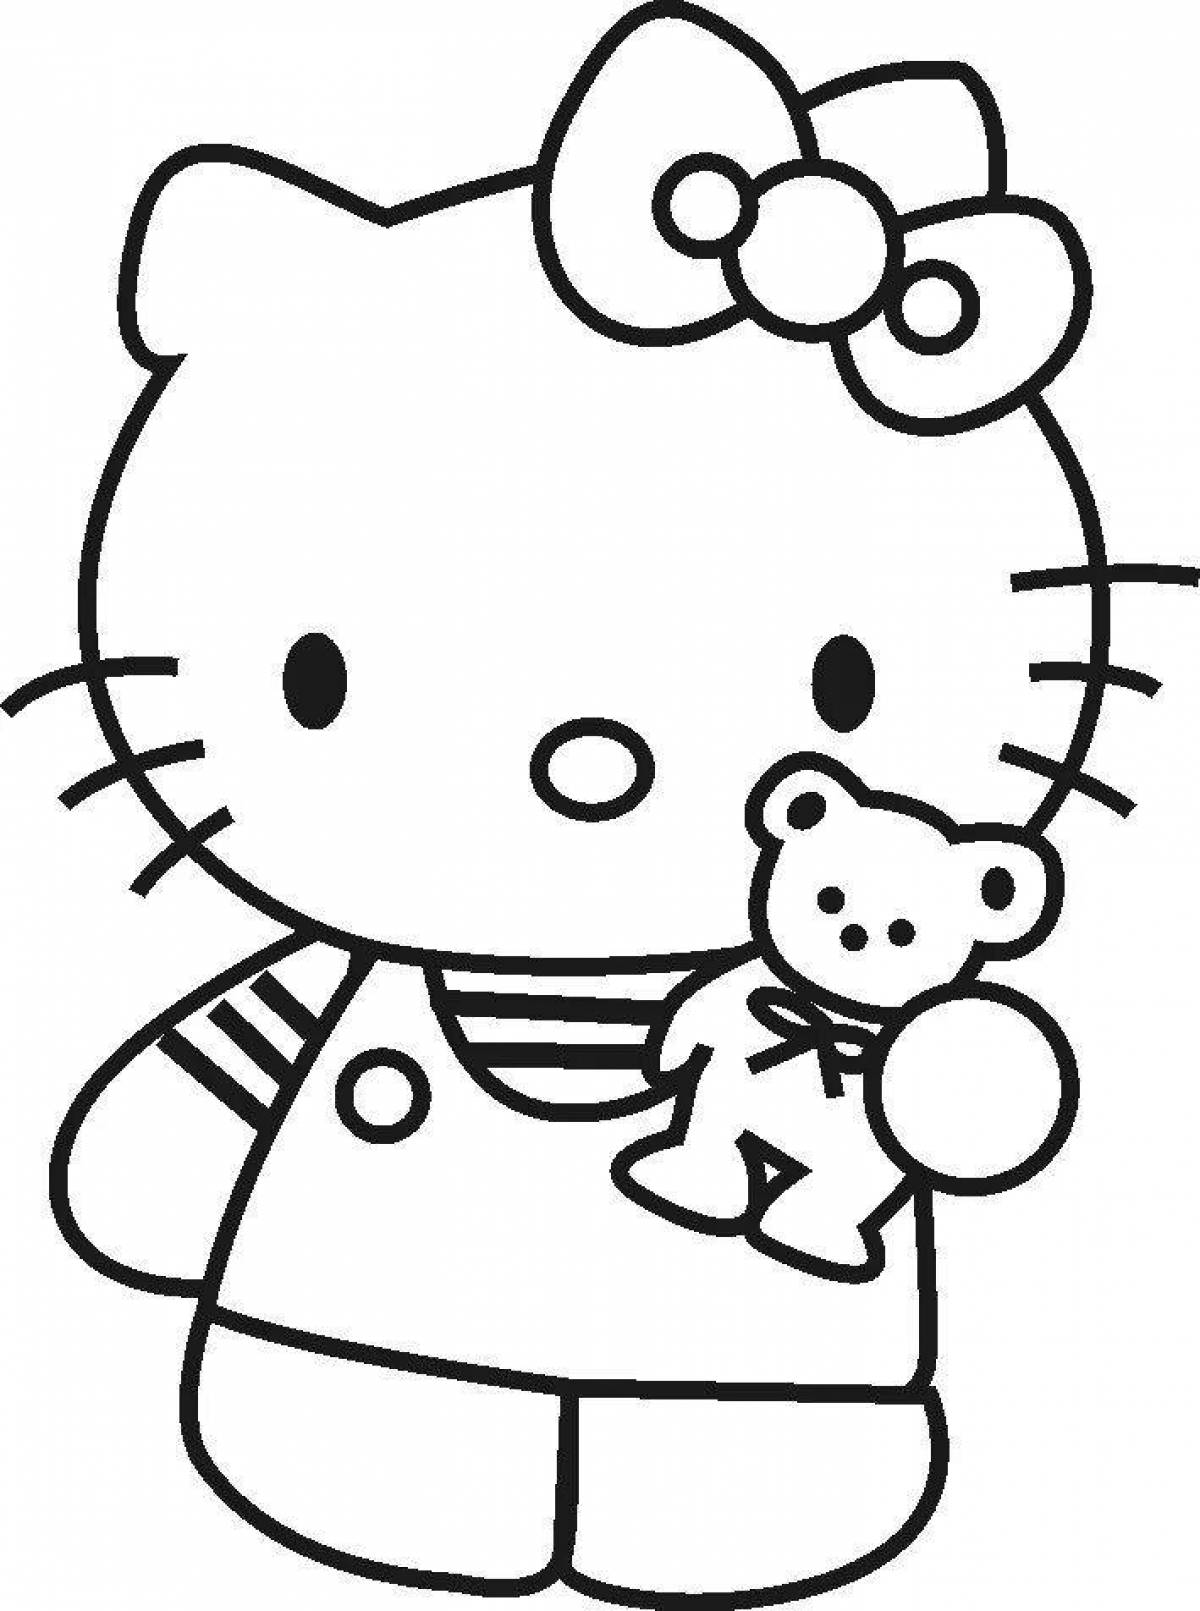 Coloring zany hello kitty with clothes